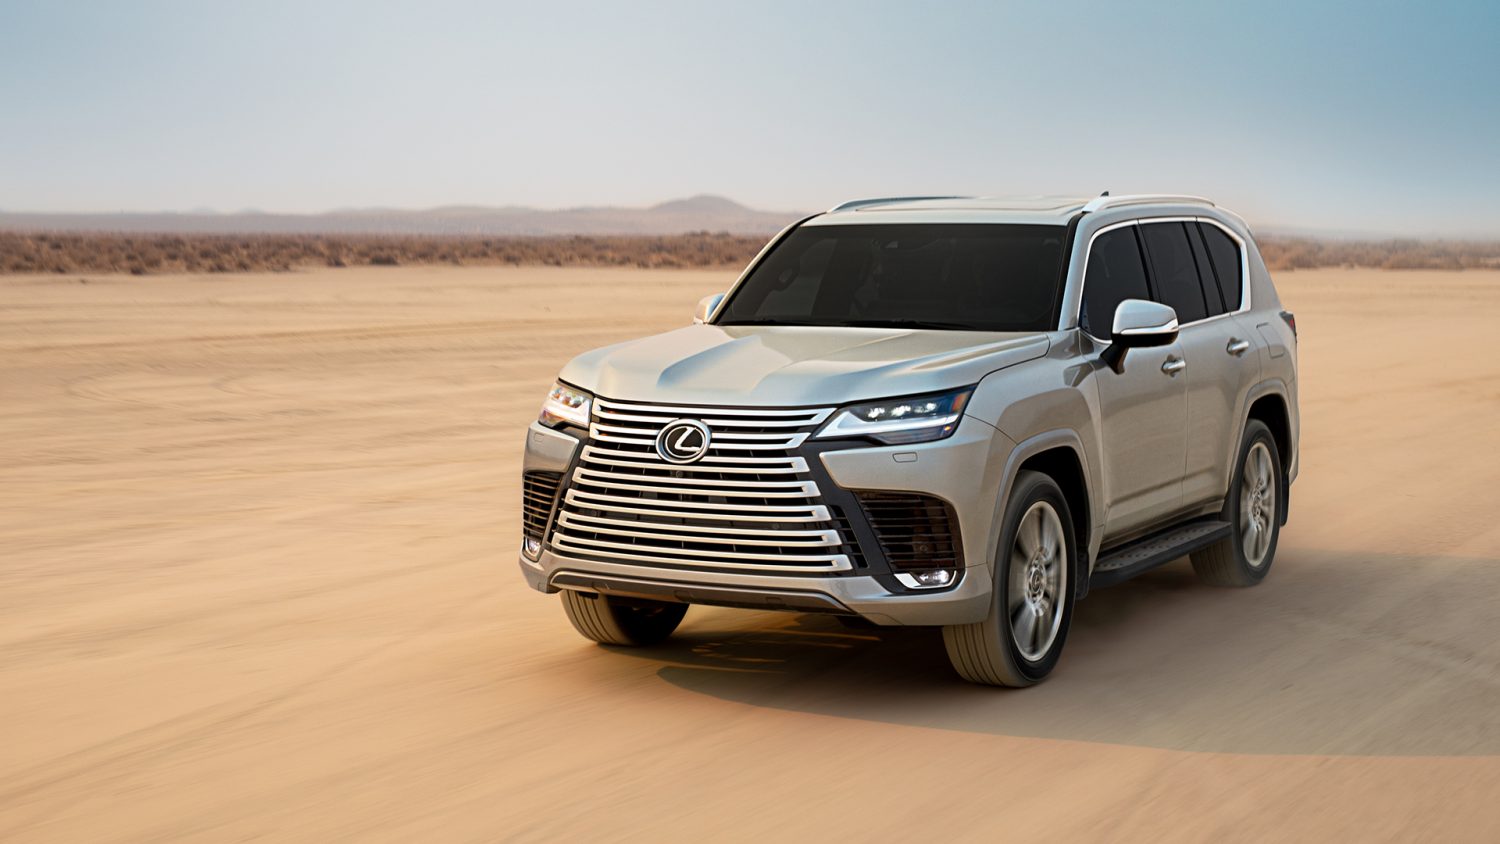 6 Things to Know About the 2022 Lexus LX 600 - Lexus USA Newsroom